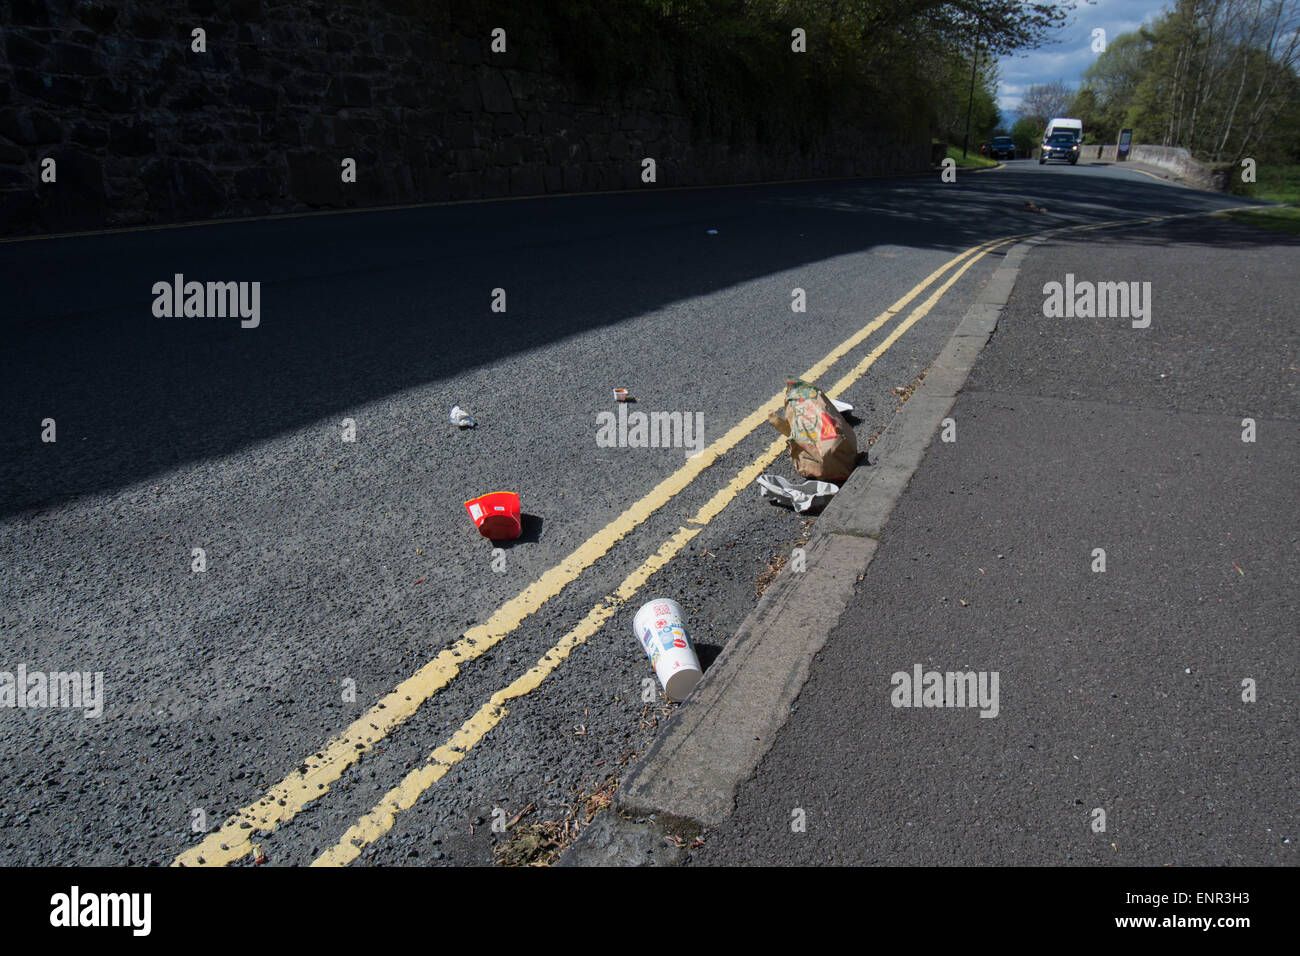 McDonald's fast food packaging dropped out of a car and left strewn by the side of the road Stock Photo